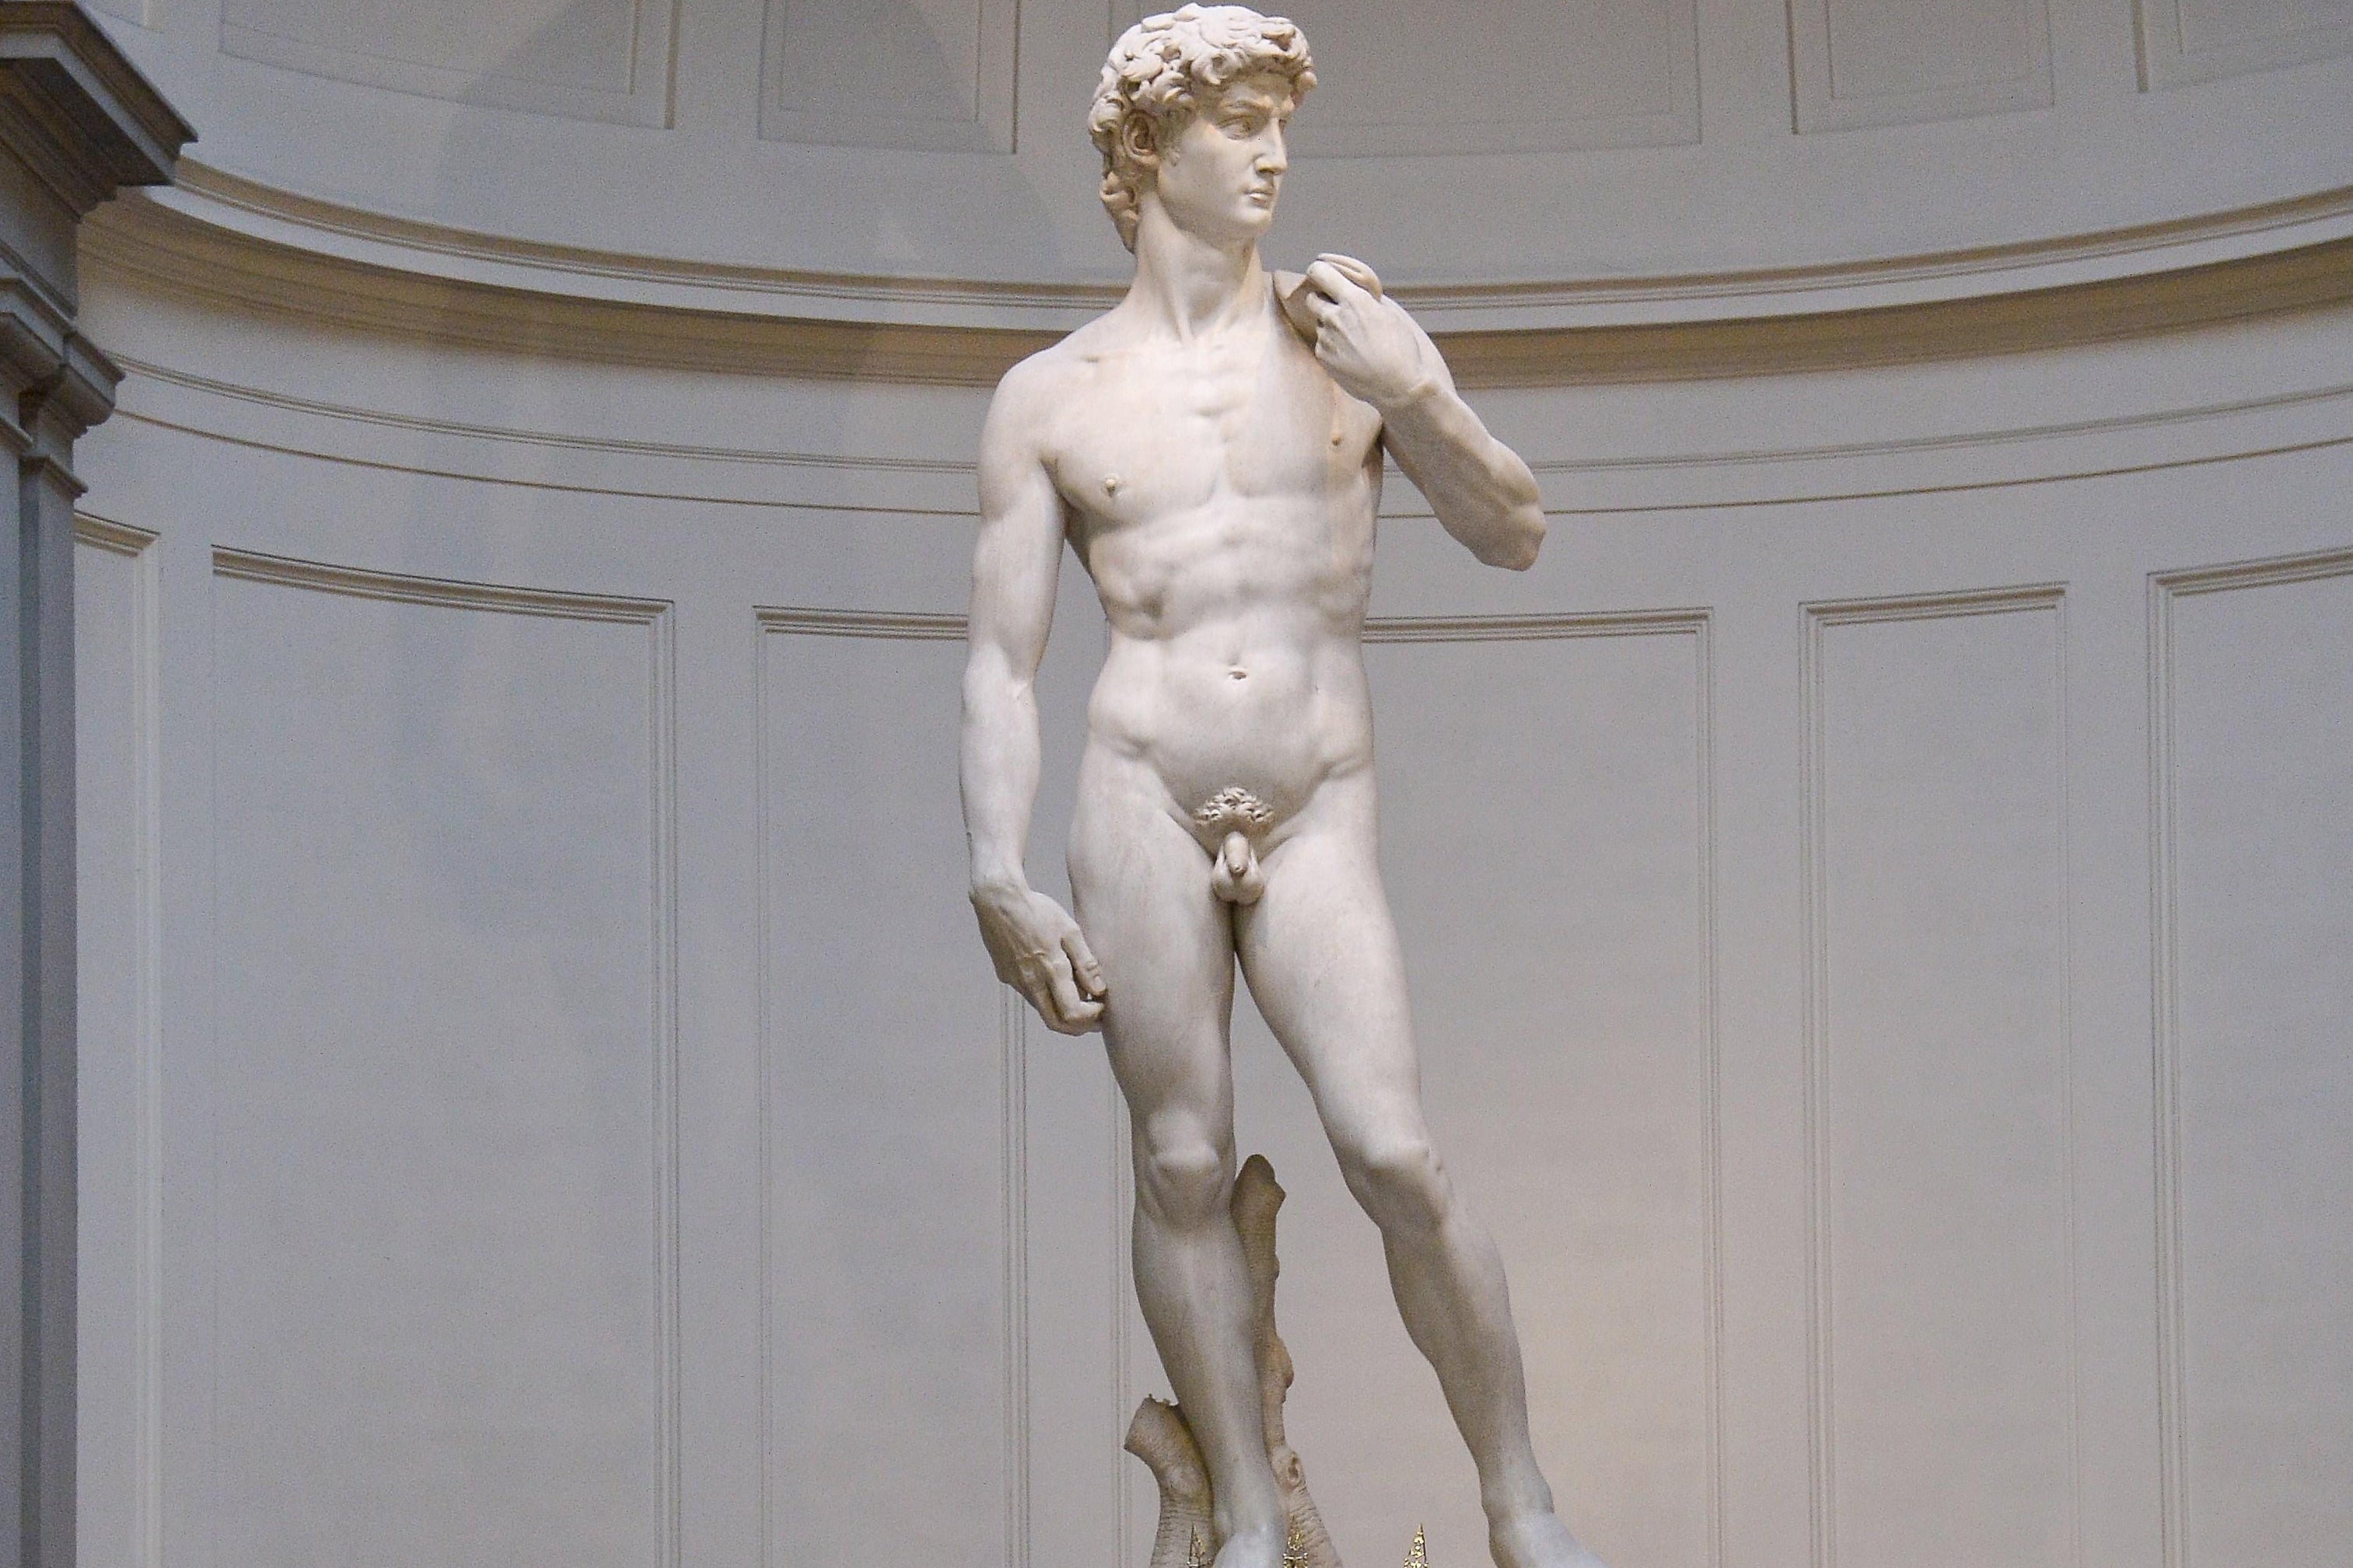 The statue of David by Michelangelo.